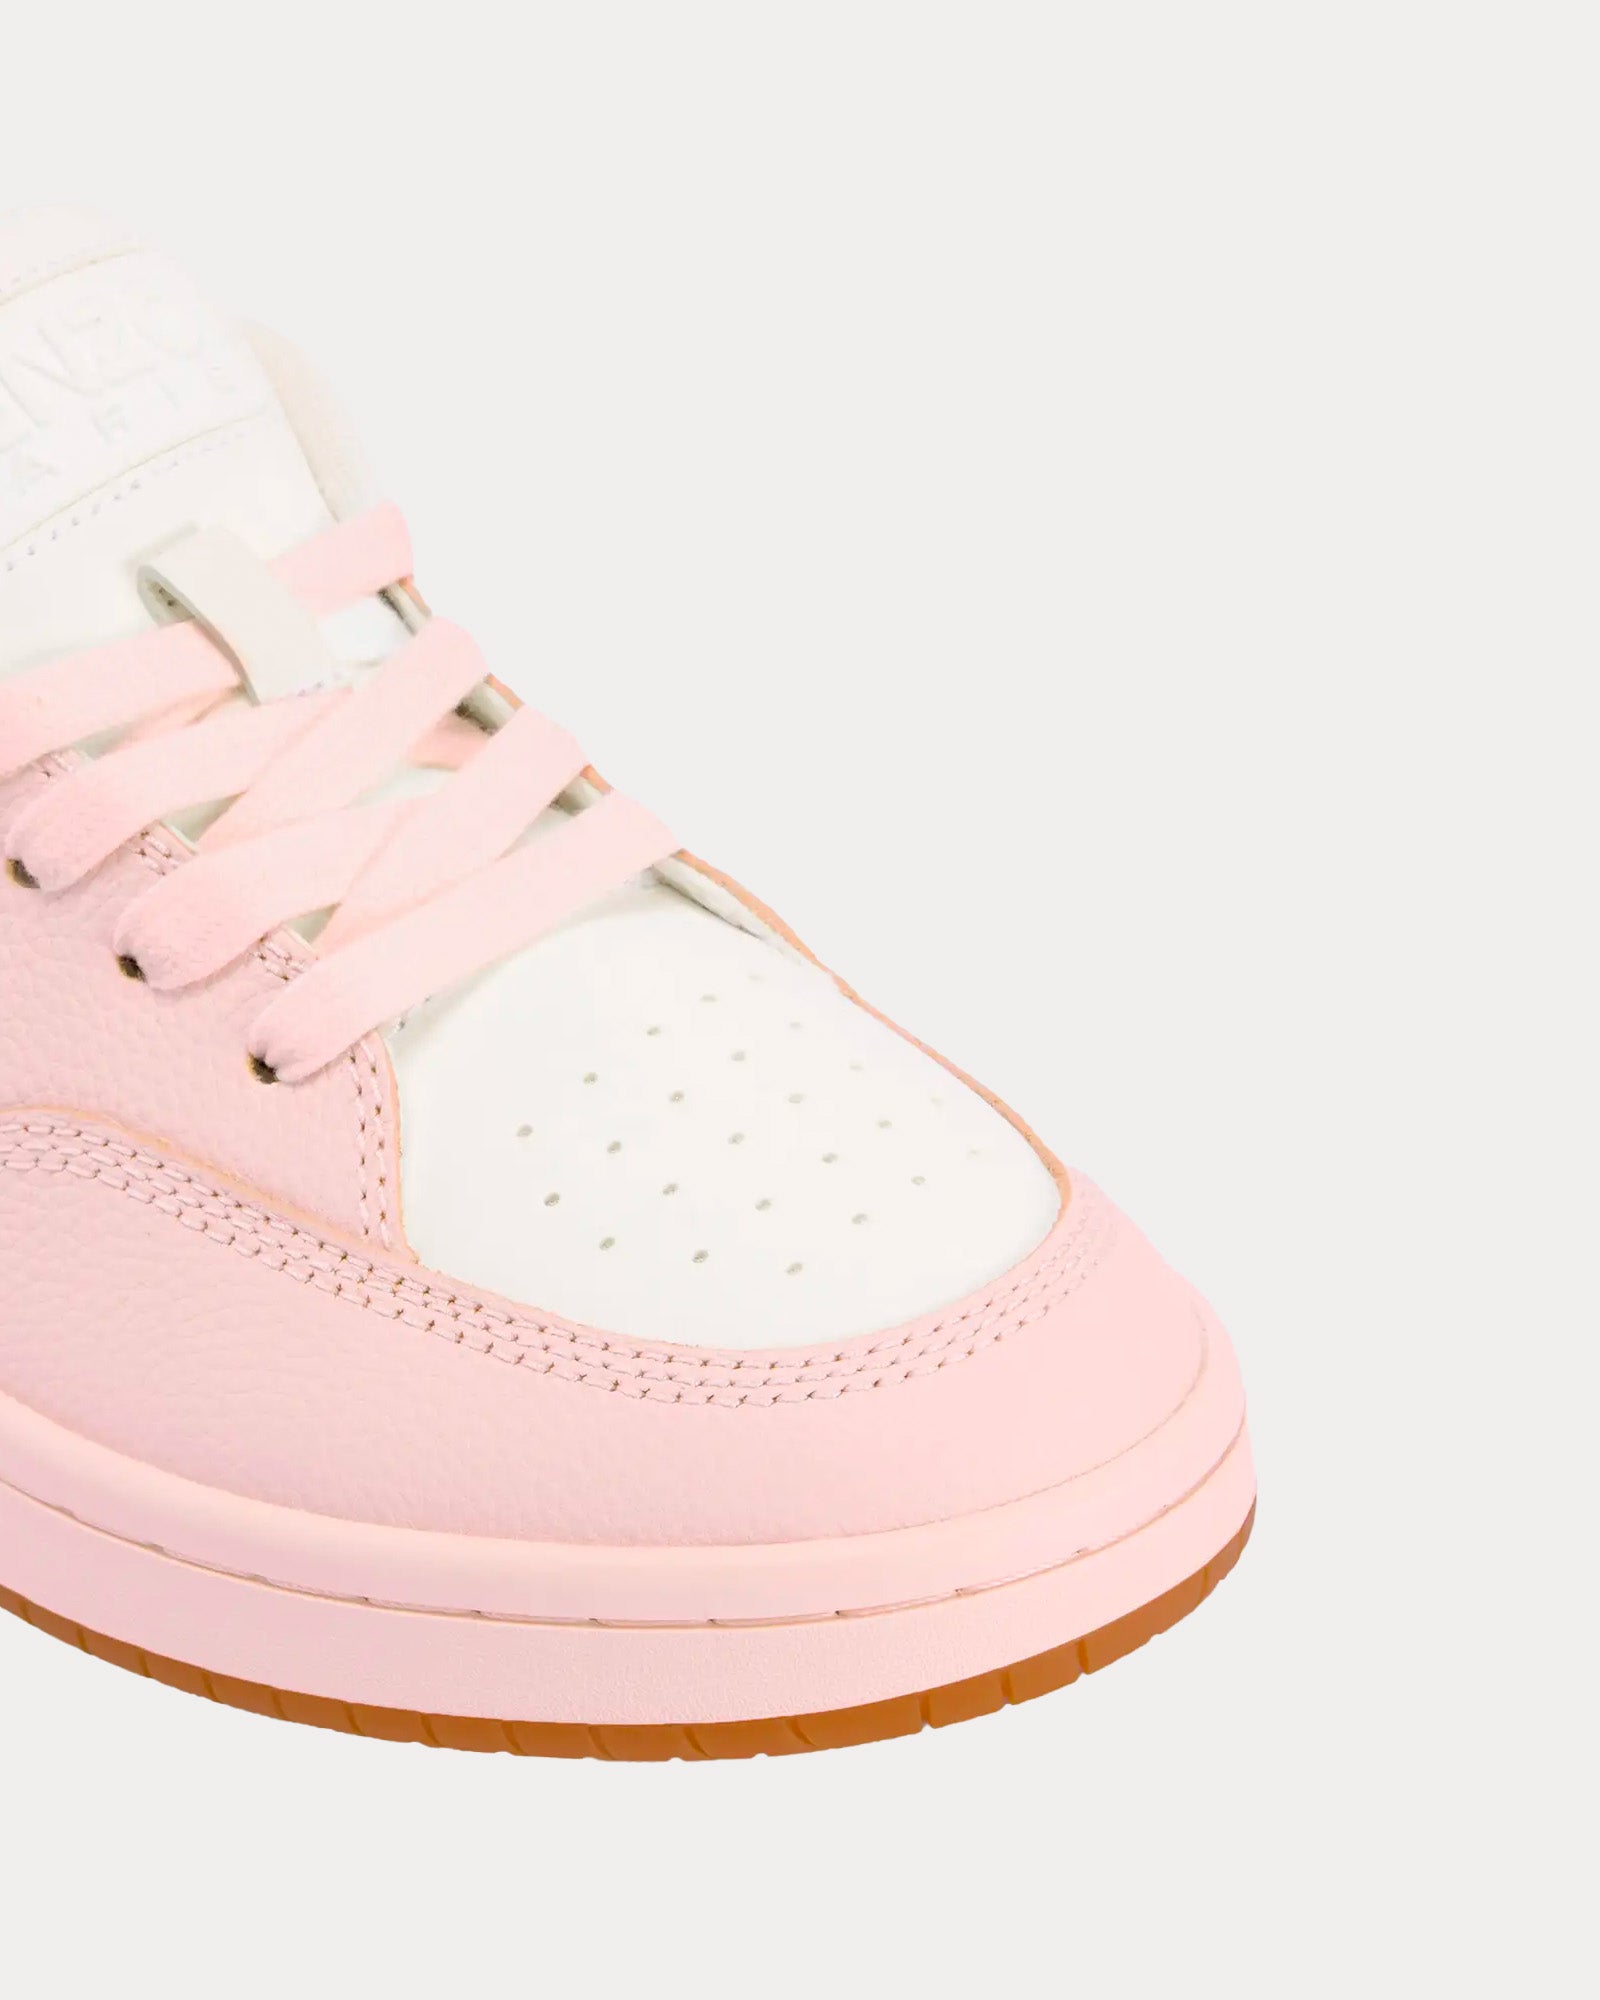 Kenzo - Kenzo-Dome Leather Faded Pink Low Top Sneakers